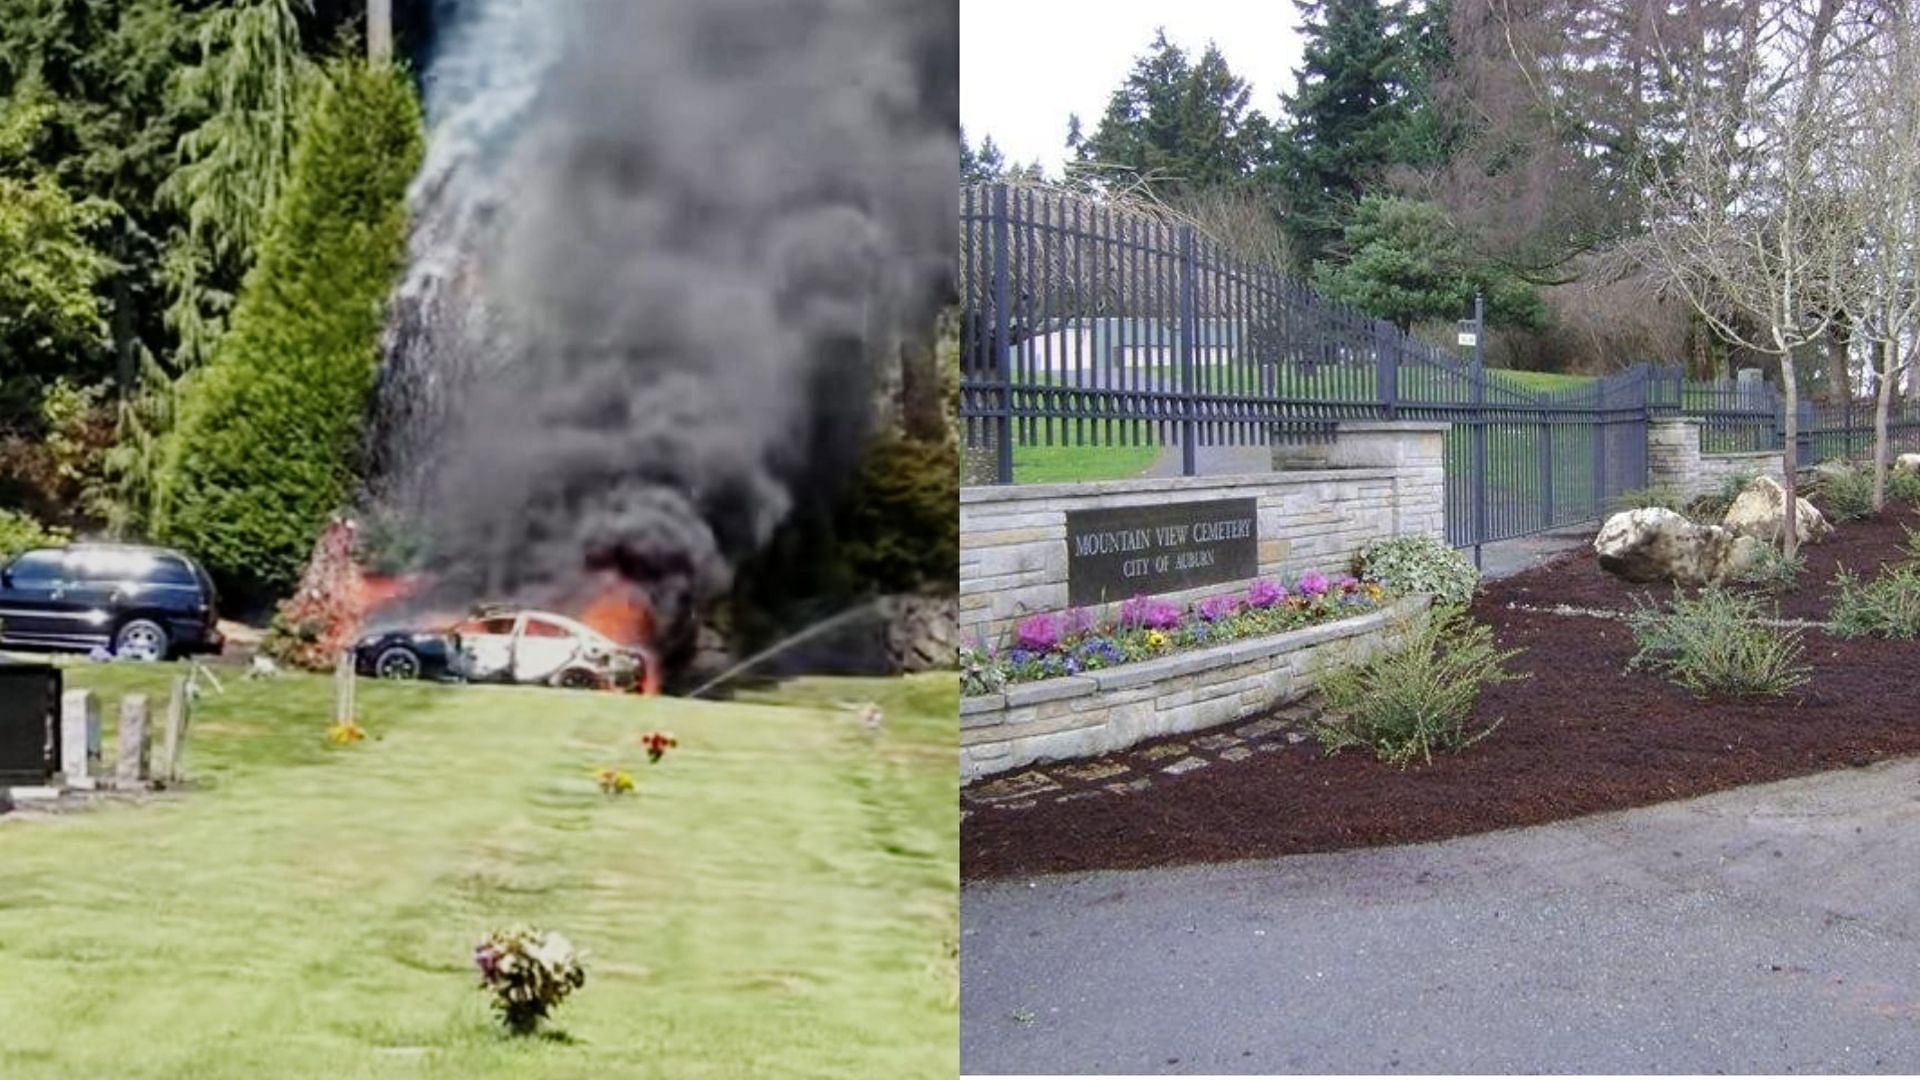 Police ask for information regarding a car explosion at a Washington funeral (Images via Twitter/auburnwa.gov)